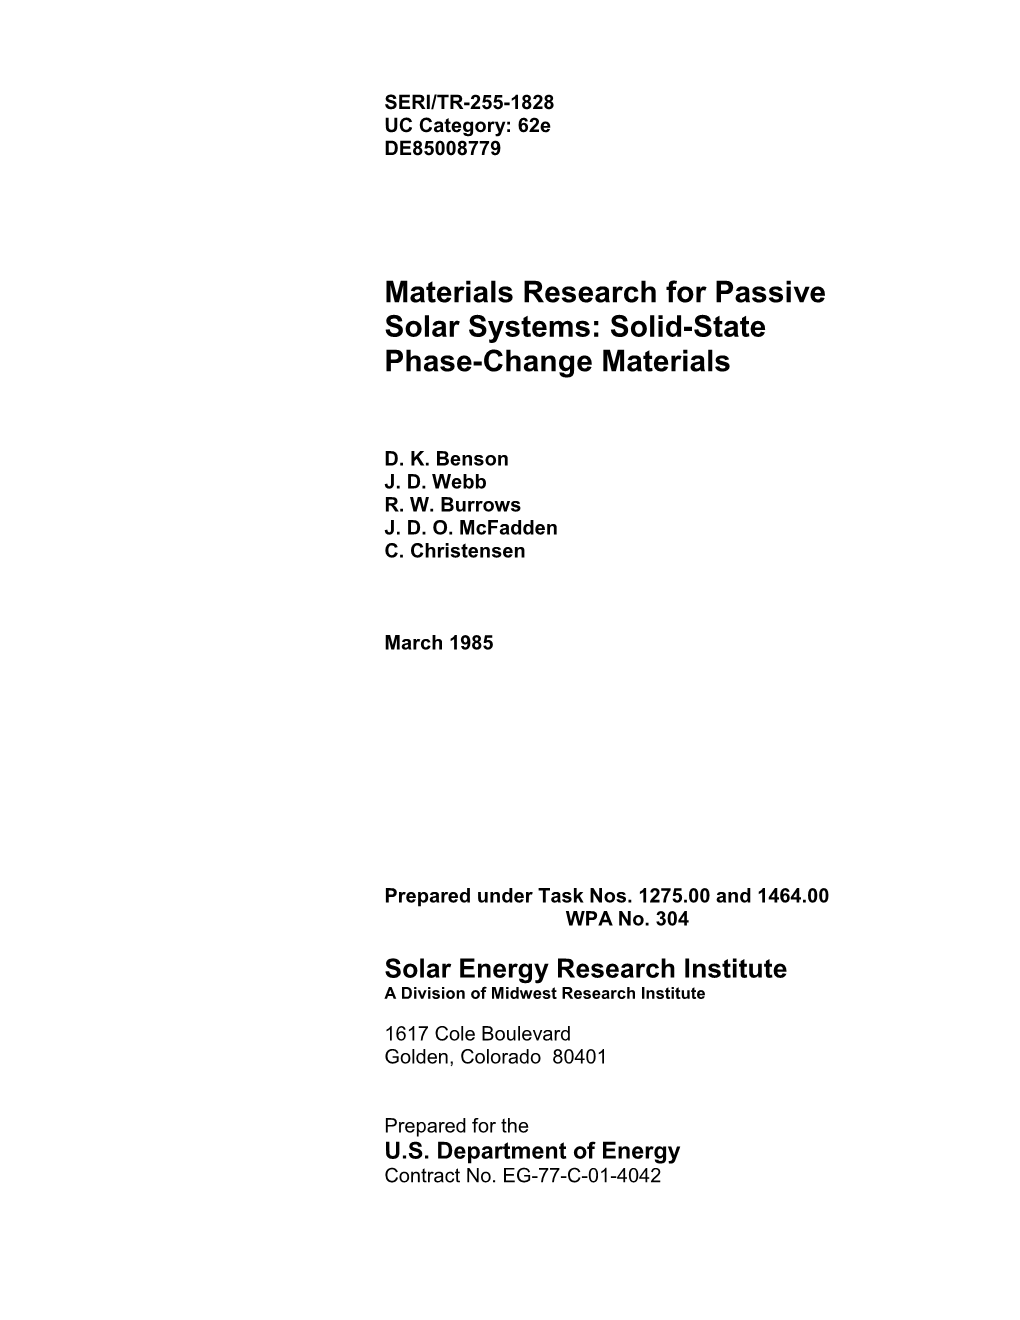 Materials Research for Passive Solar Systems: Solid-State Phase-Change Materials